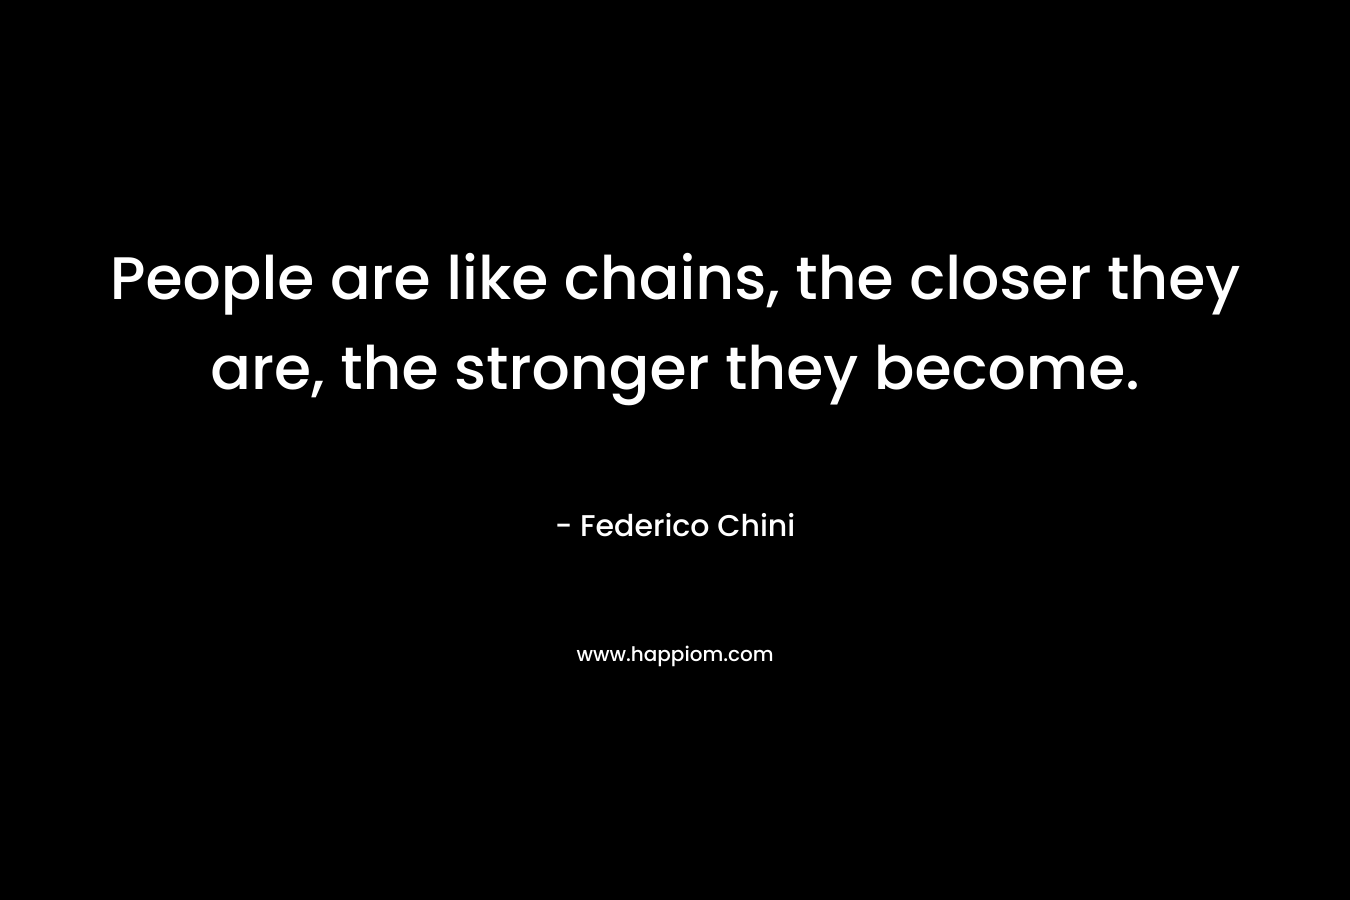 People are like chains, the closer they are, the stronger they become.